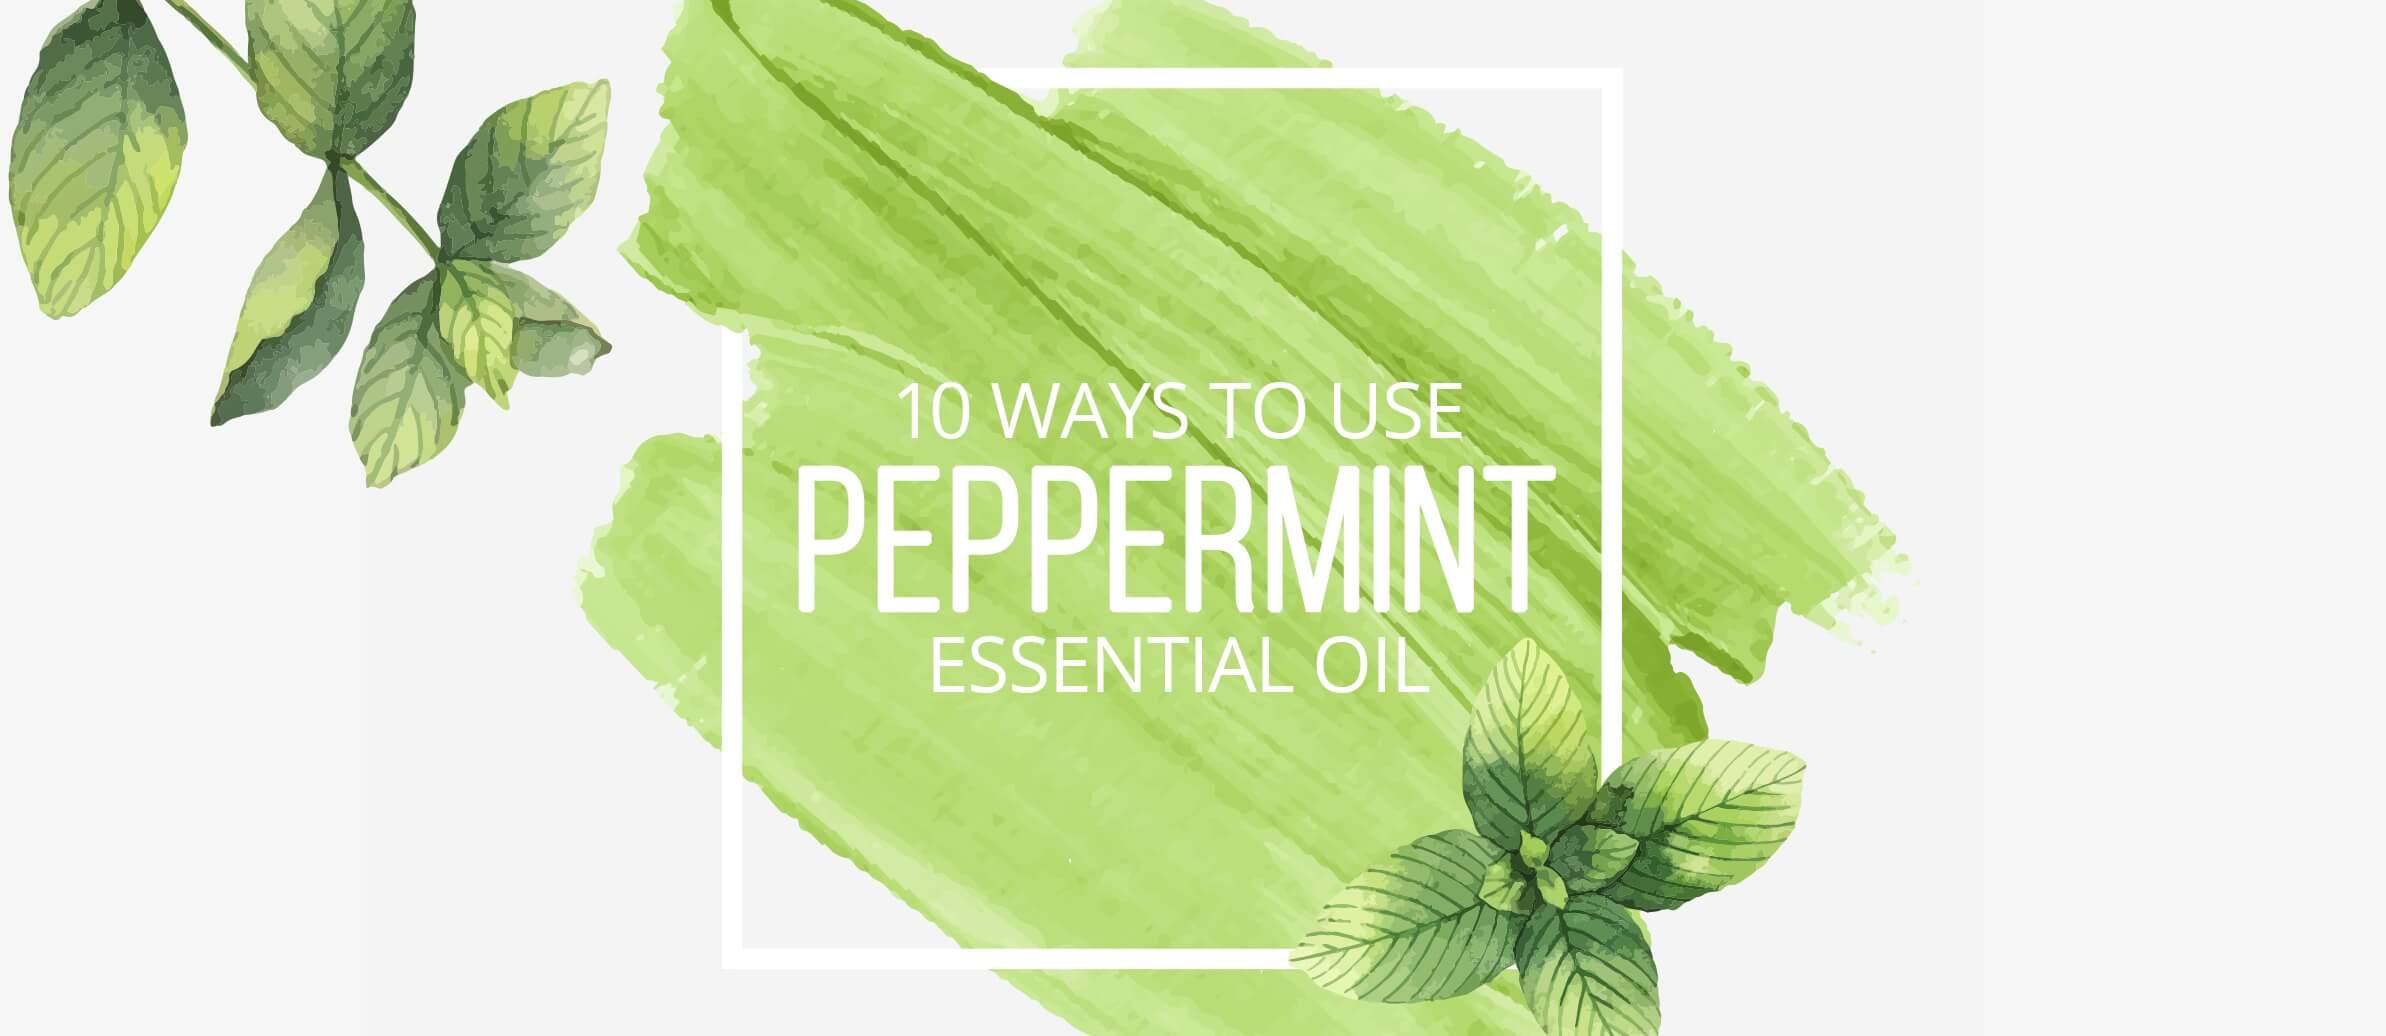 10 Ways to Use Peppermint Essential Oil